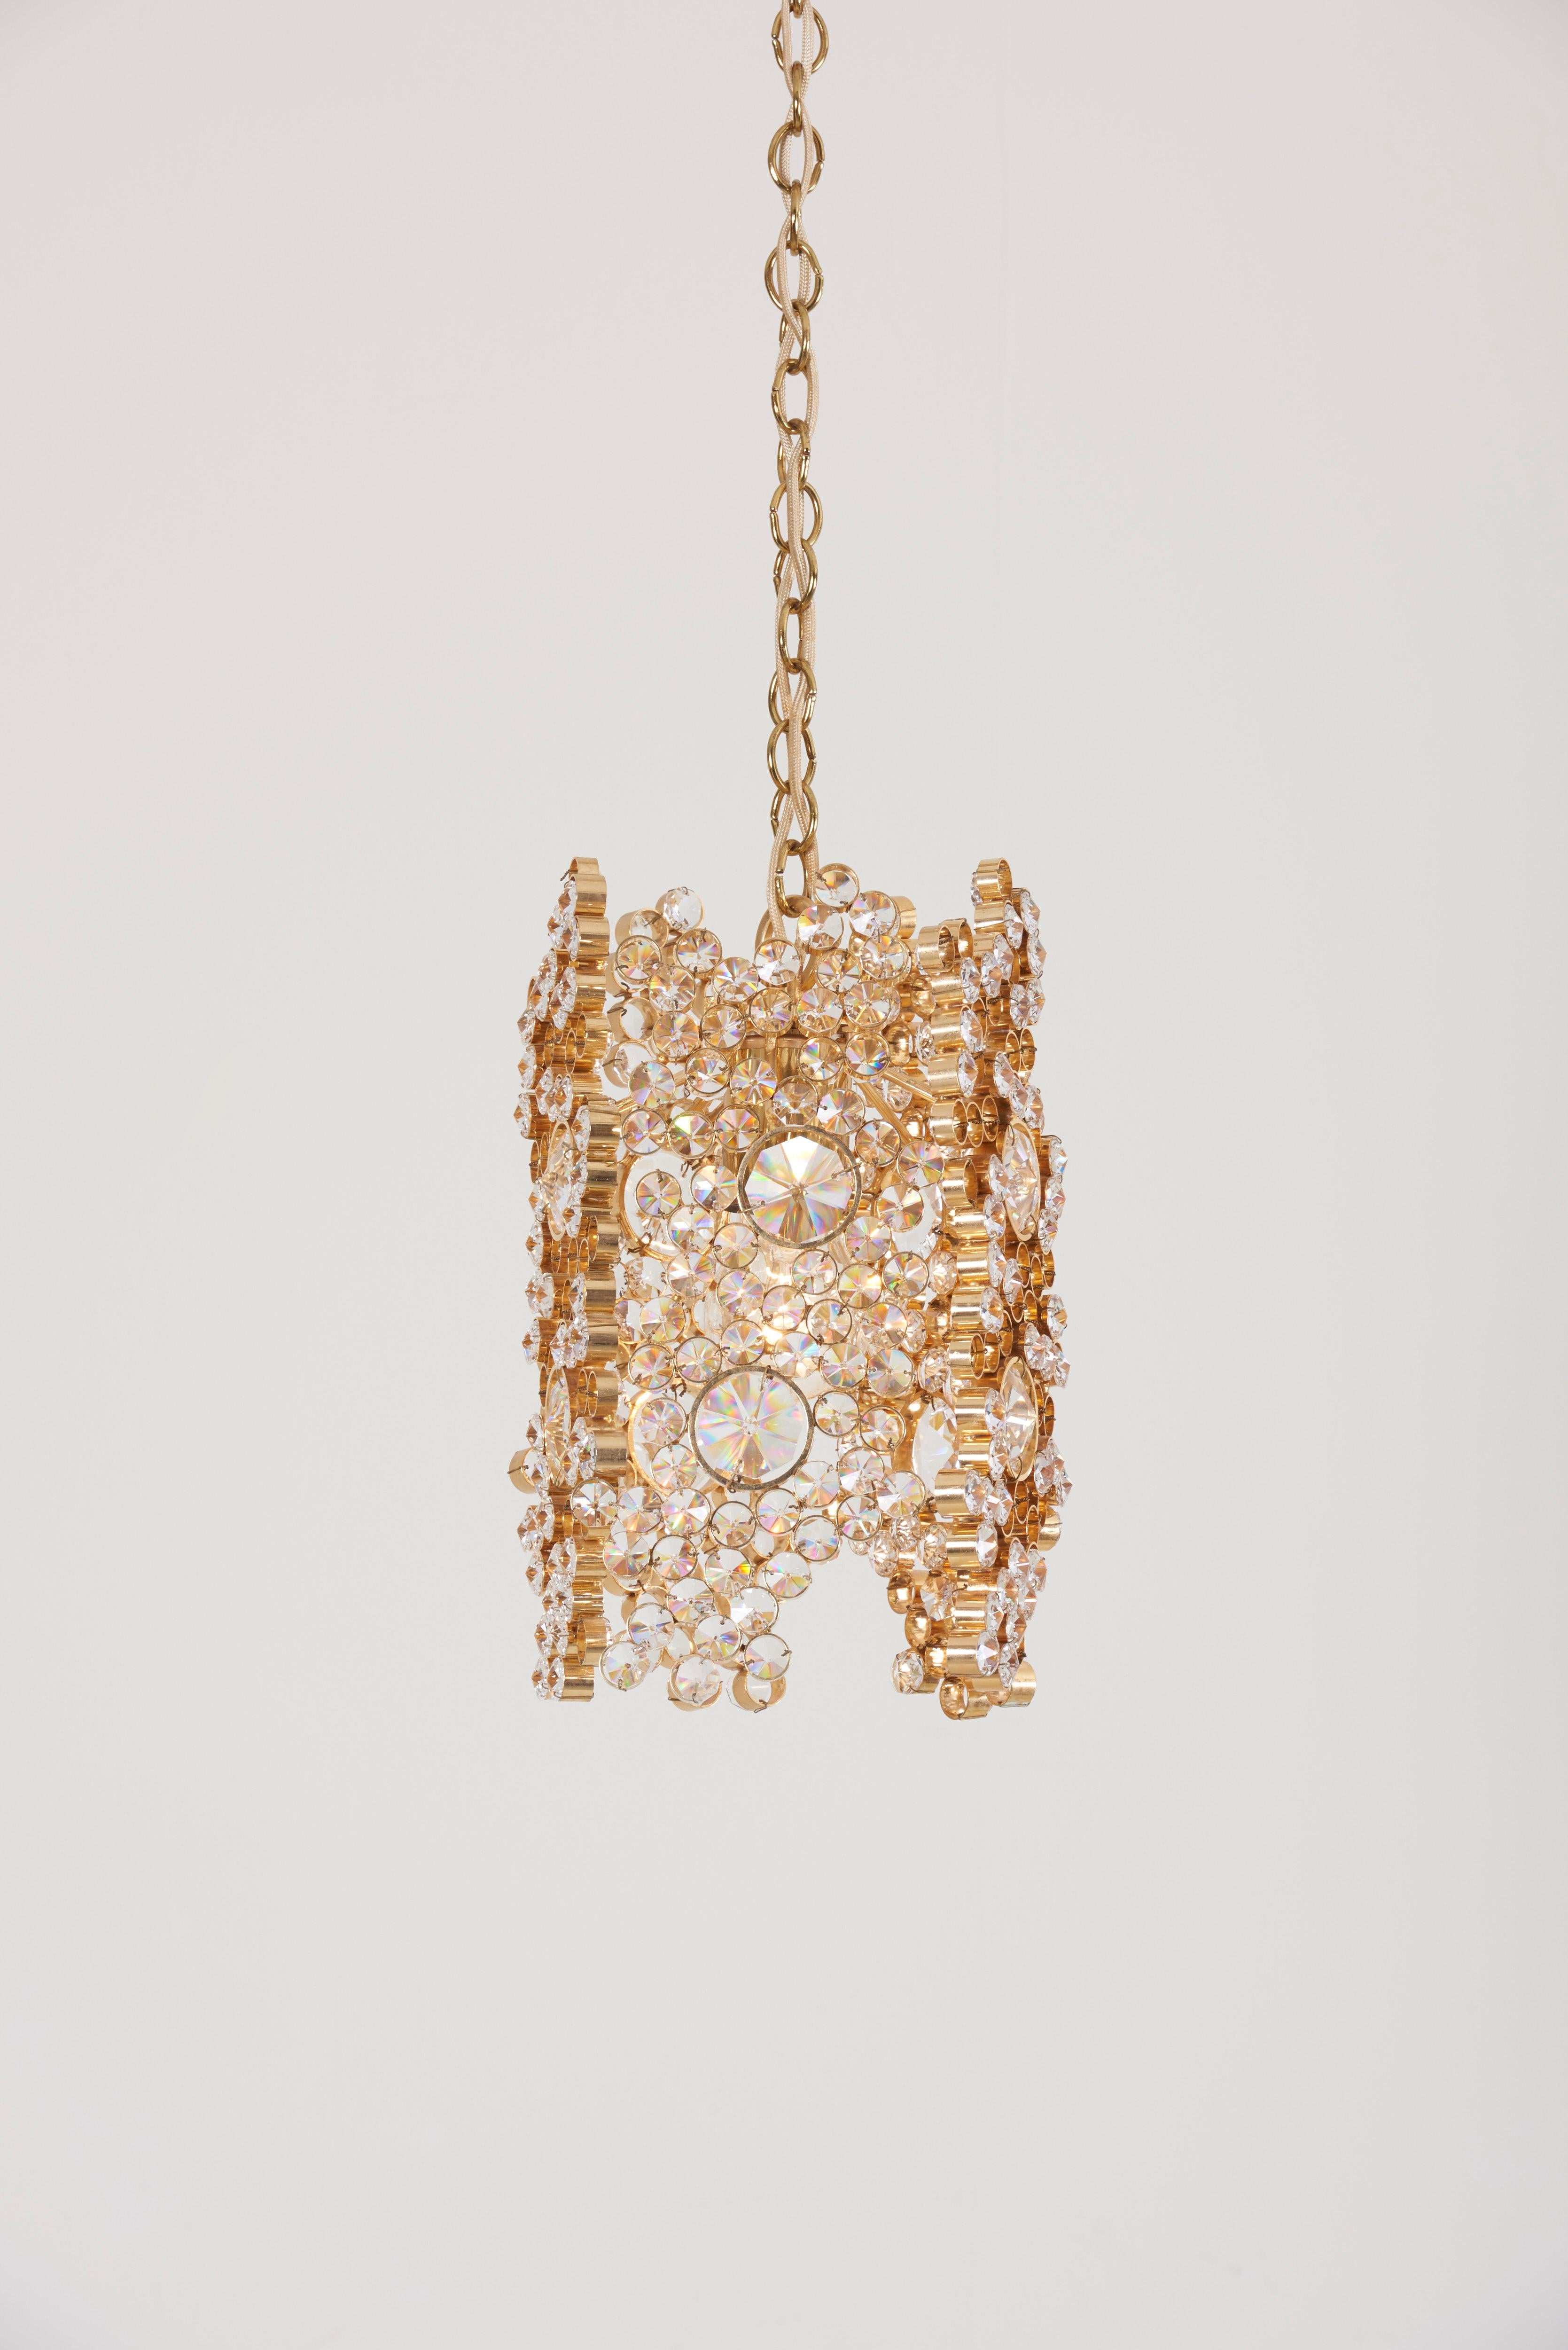 German Palwa Gilded Brass and Crystal Glass Encrusted Pendant Lamp For Sale